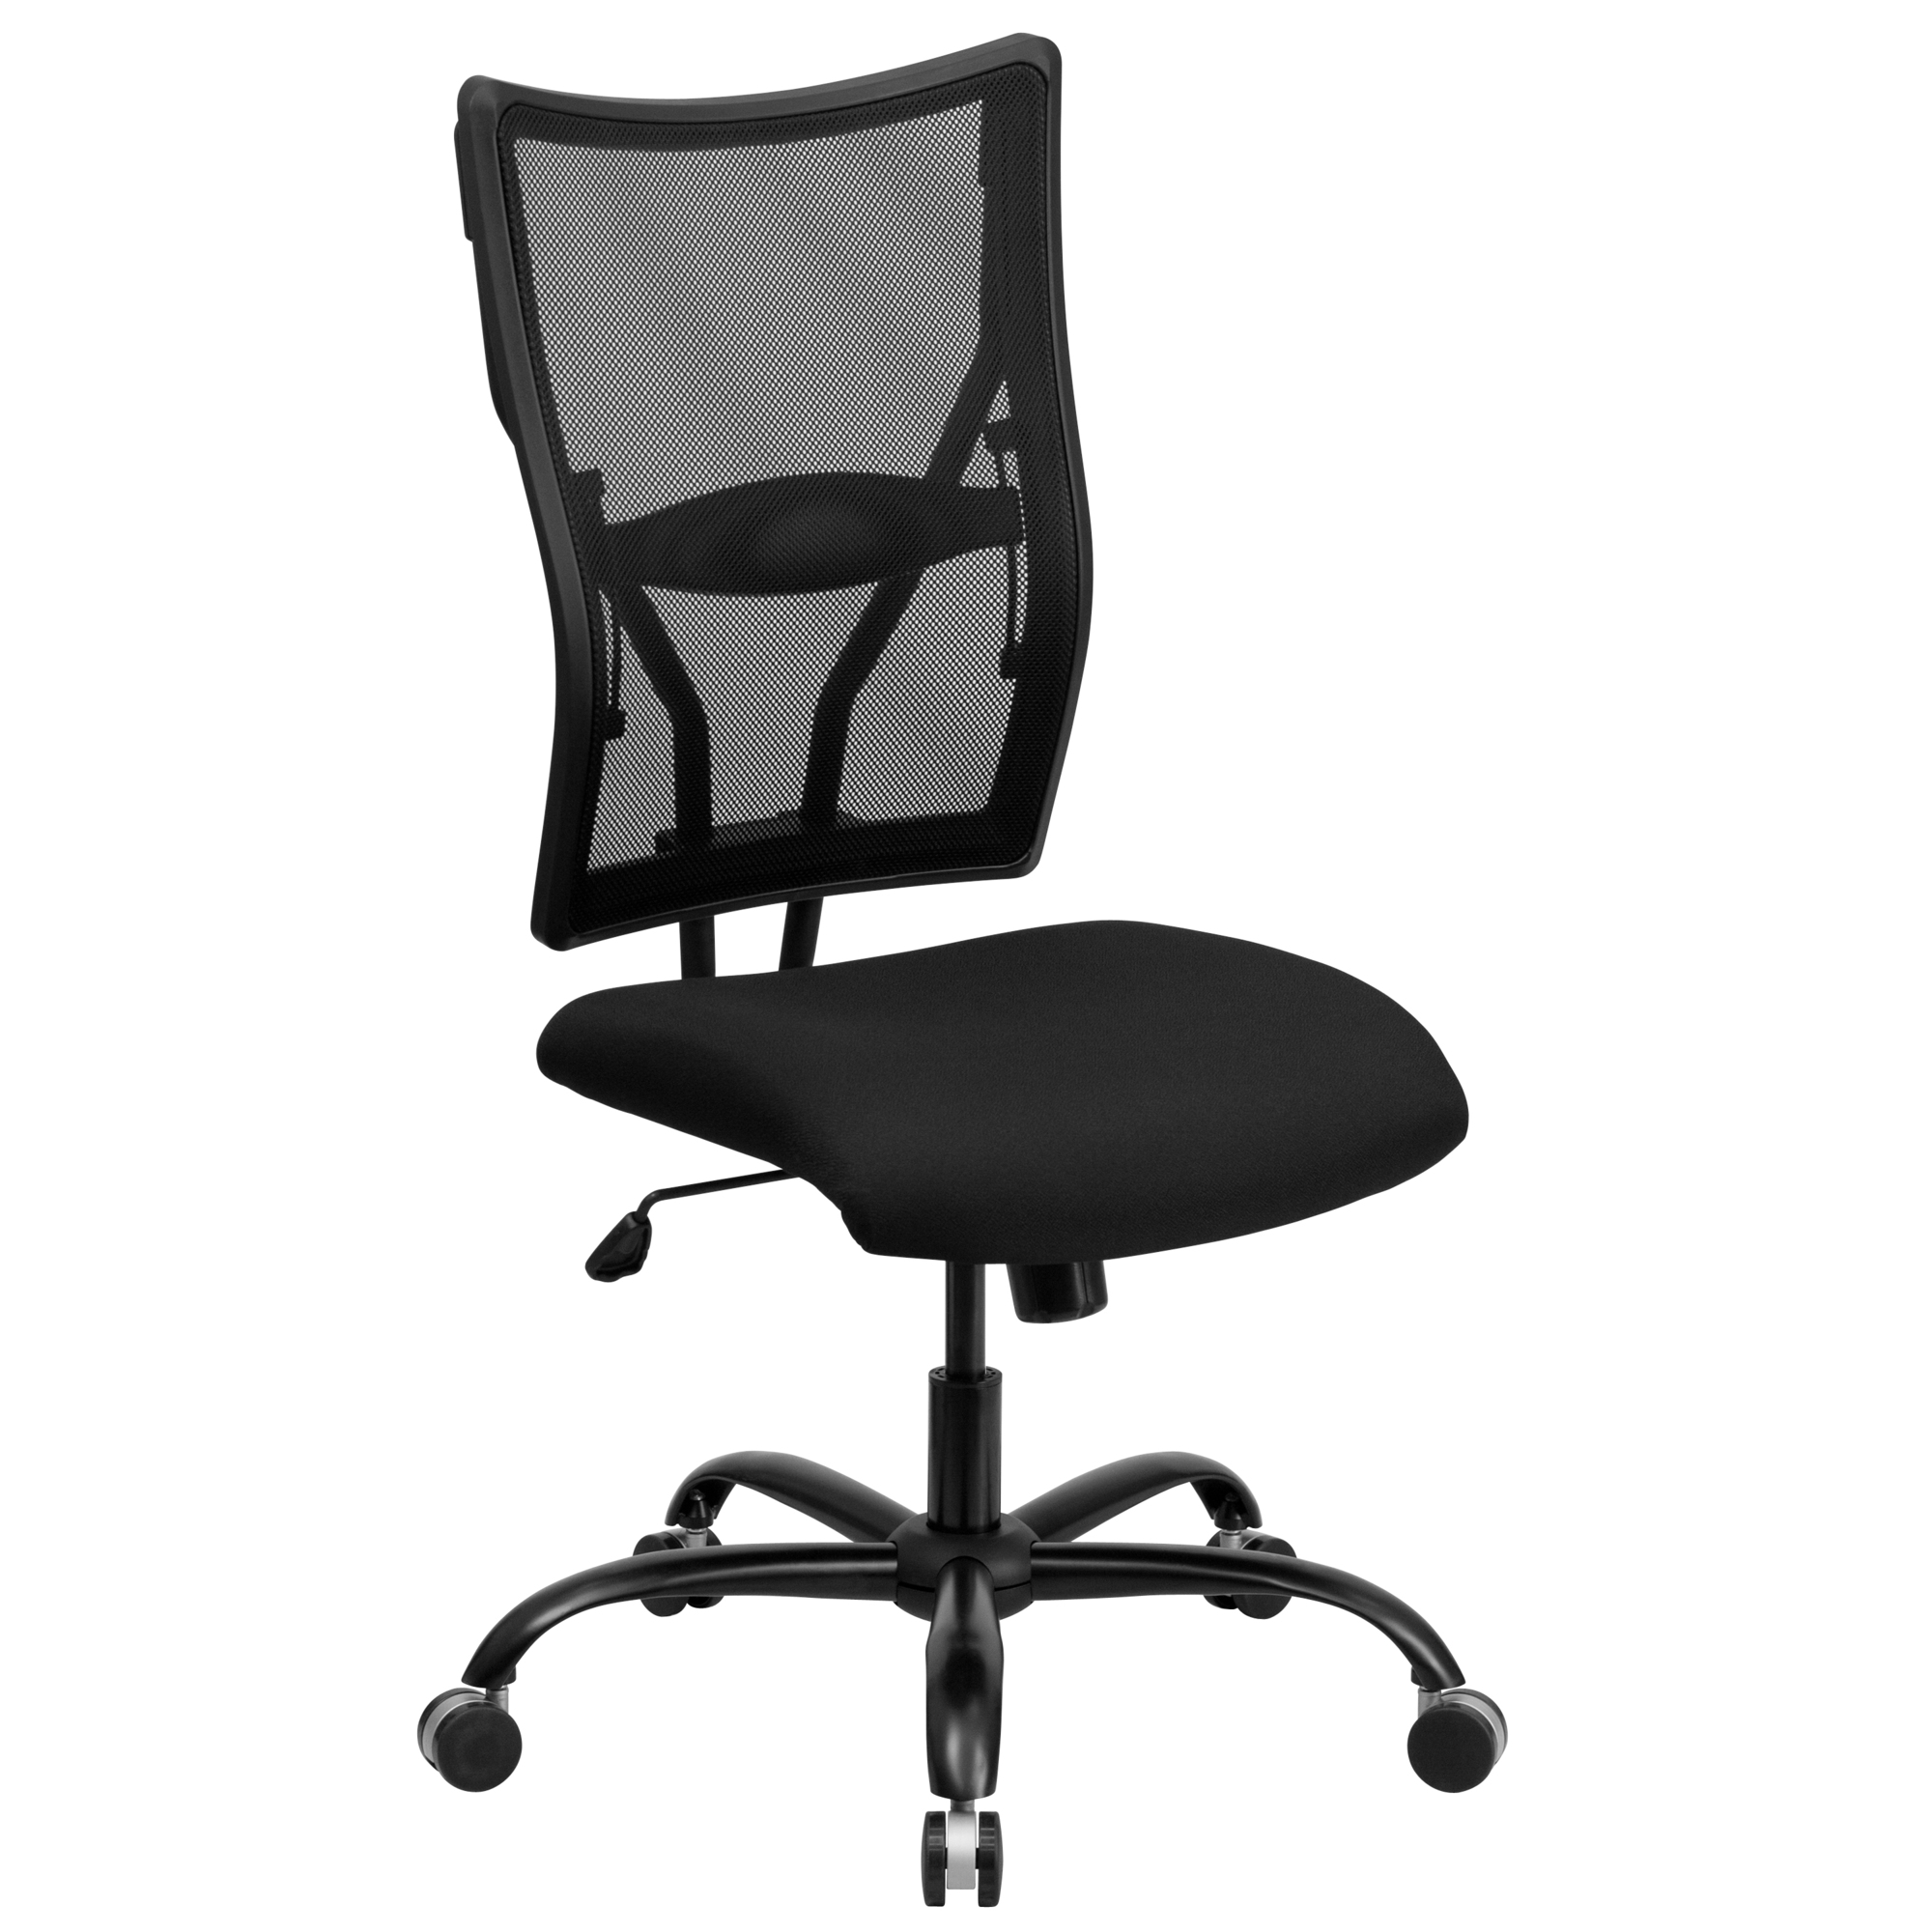 Flash Furniture, Big Tall 400 lb. Rated Black Mesh Office Chair, Primary Color Black, Included (qty.) 1, Model WL5029SYG